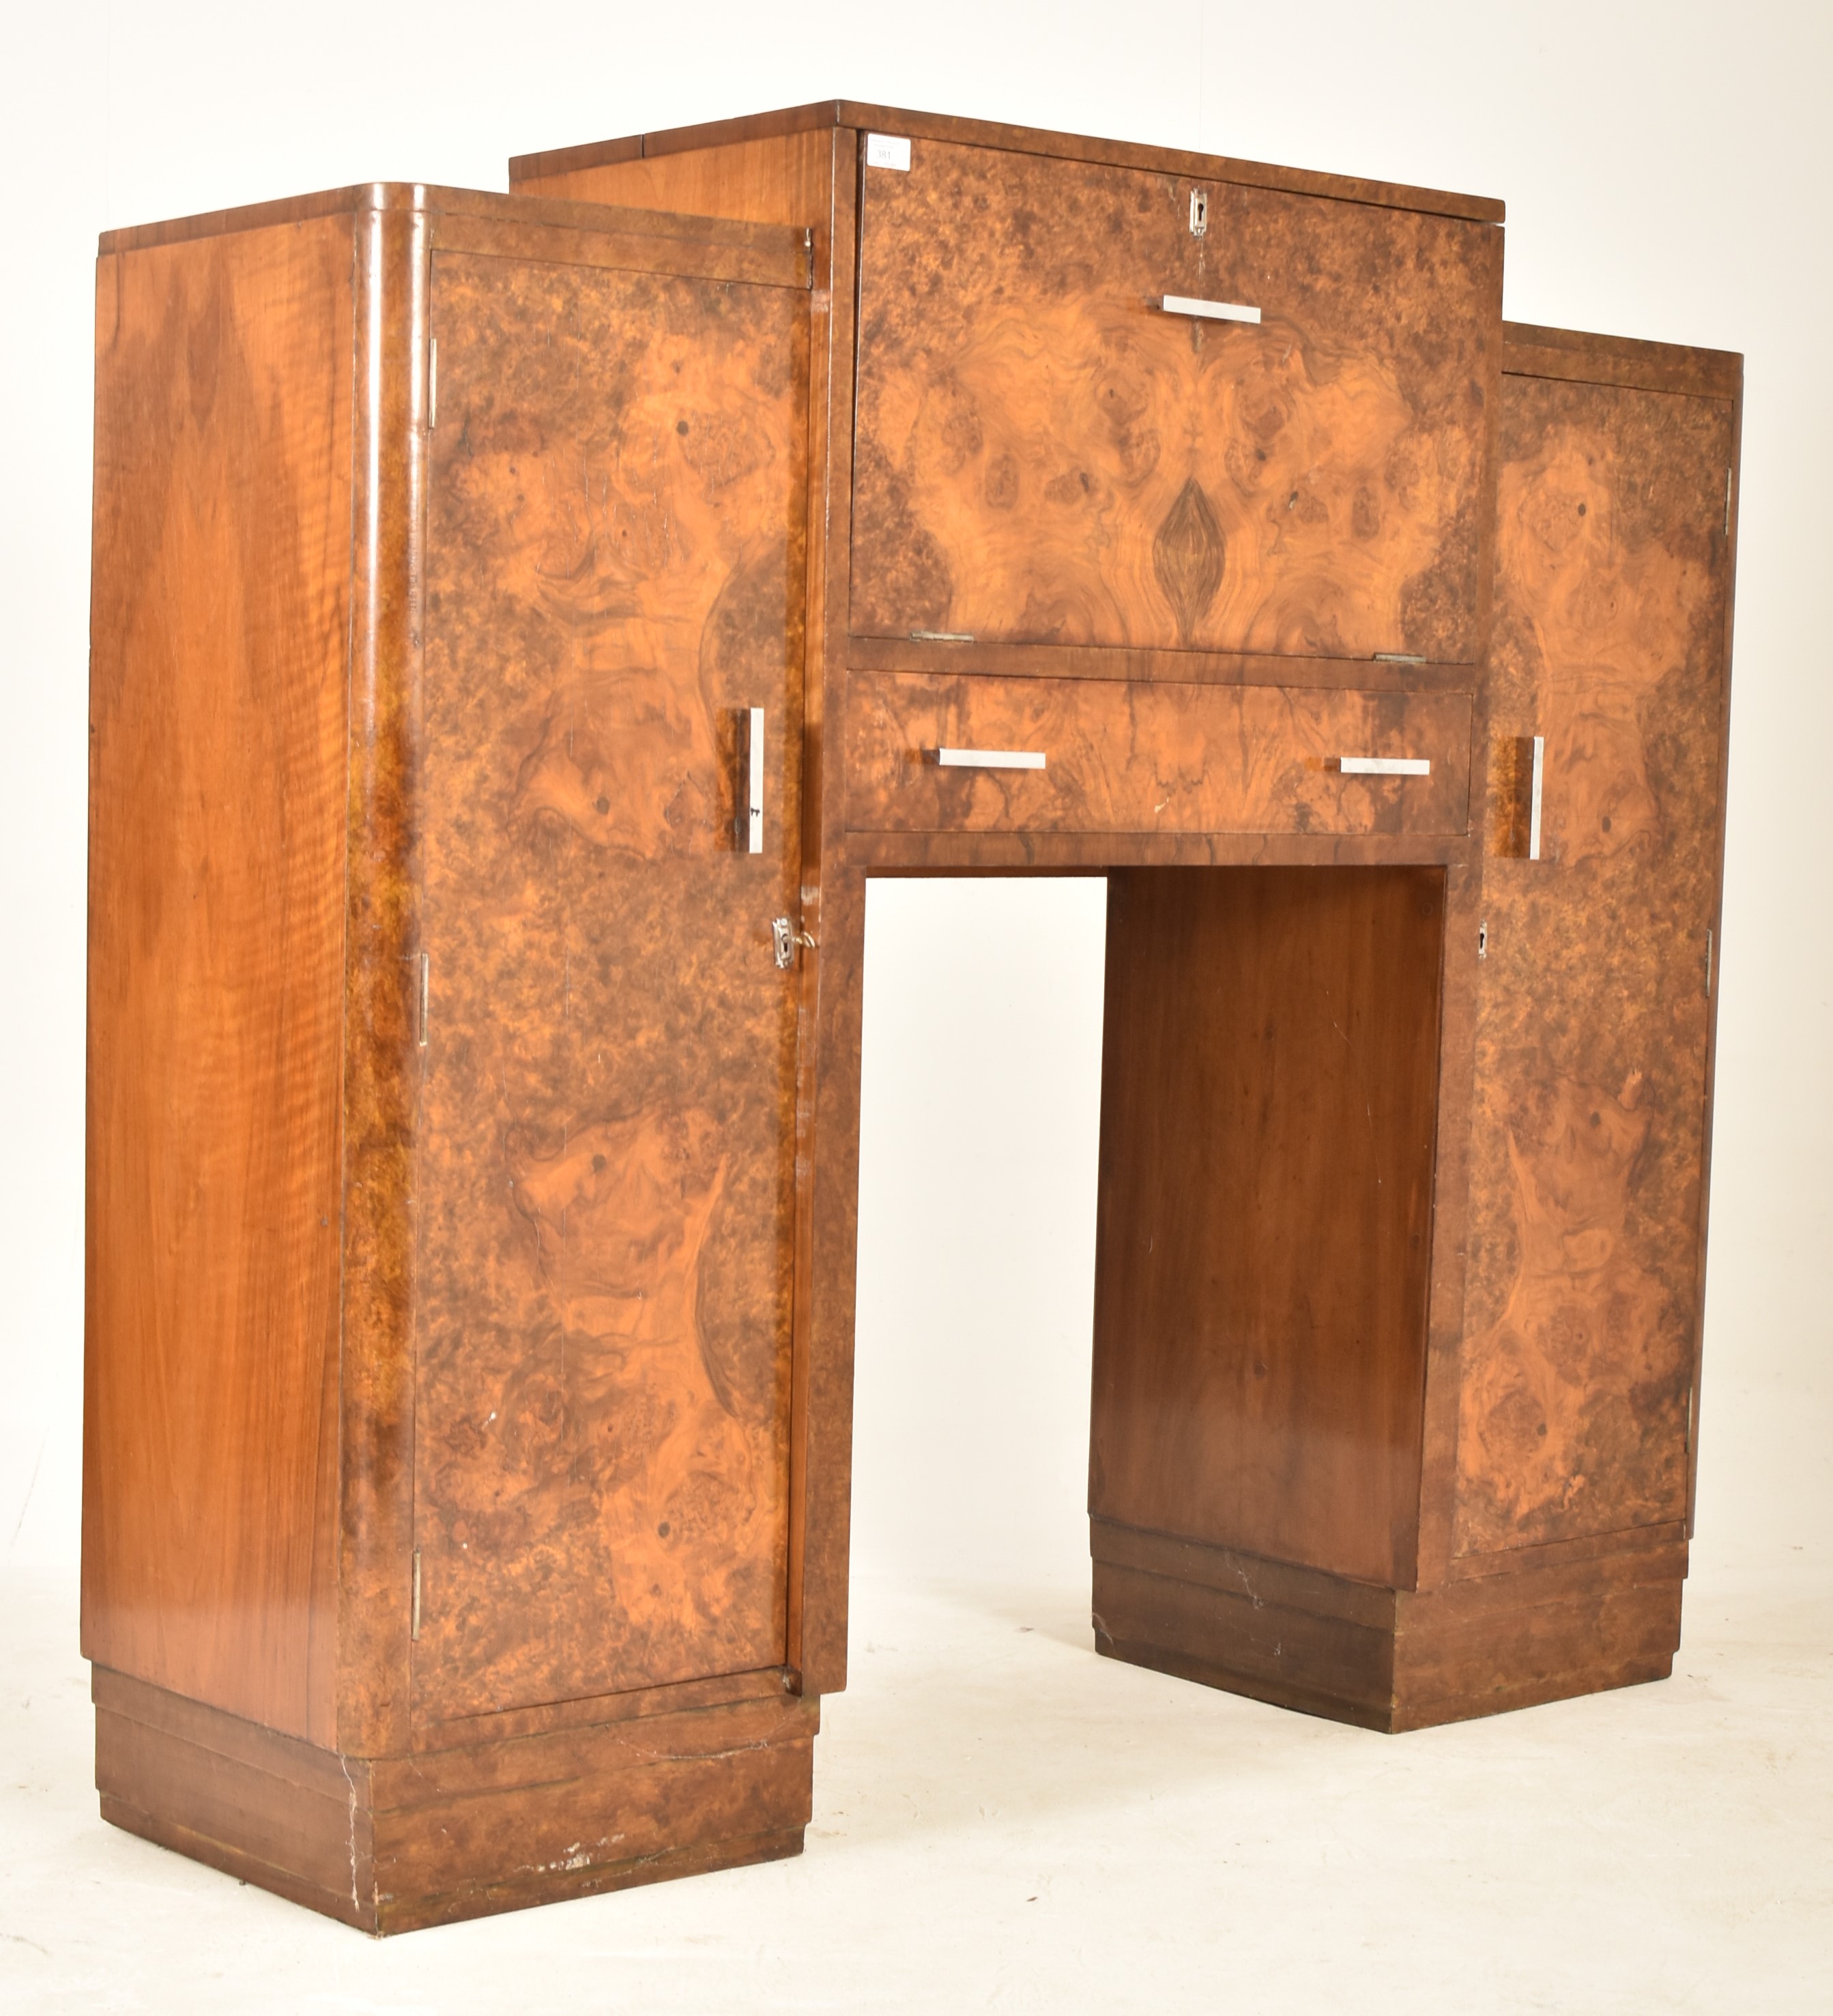 ART DECO 1930S BURR WALNUT FALL FRONT COCKTAIL CABINET